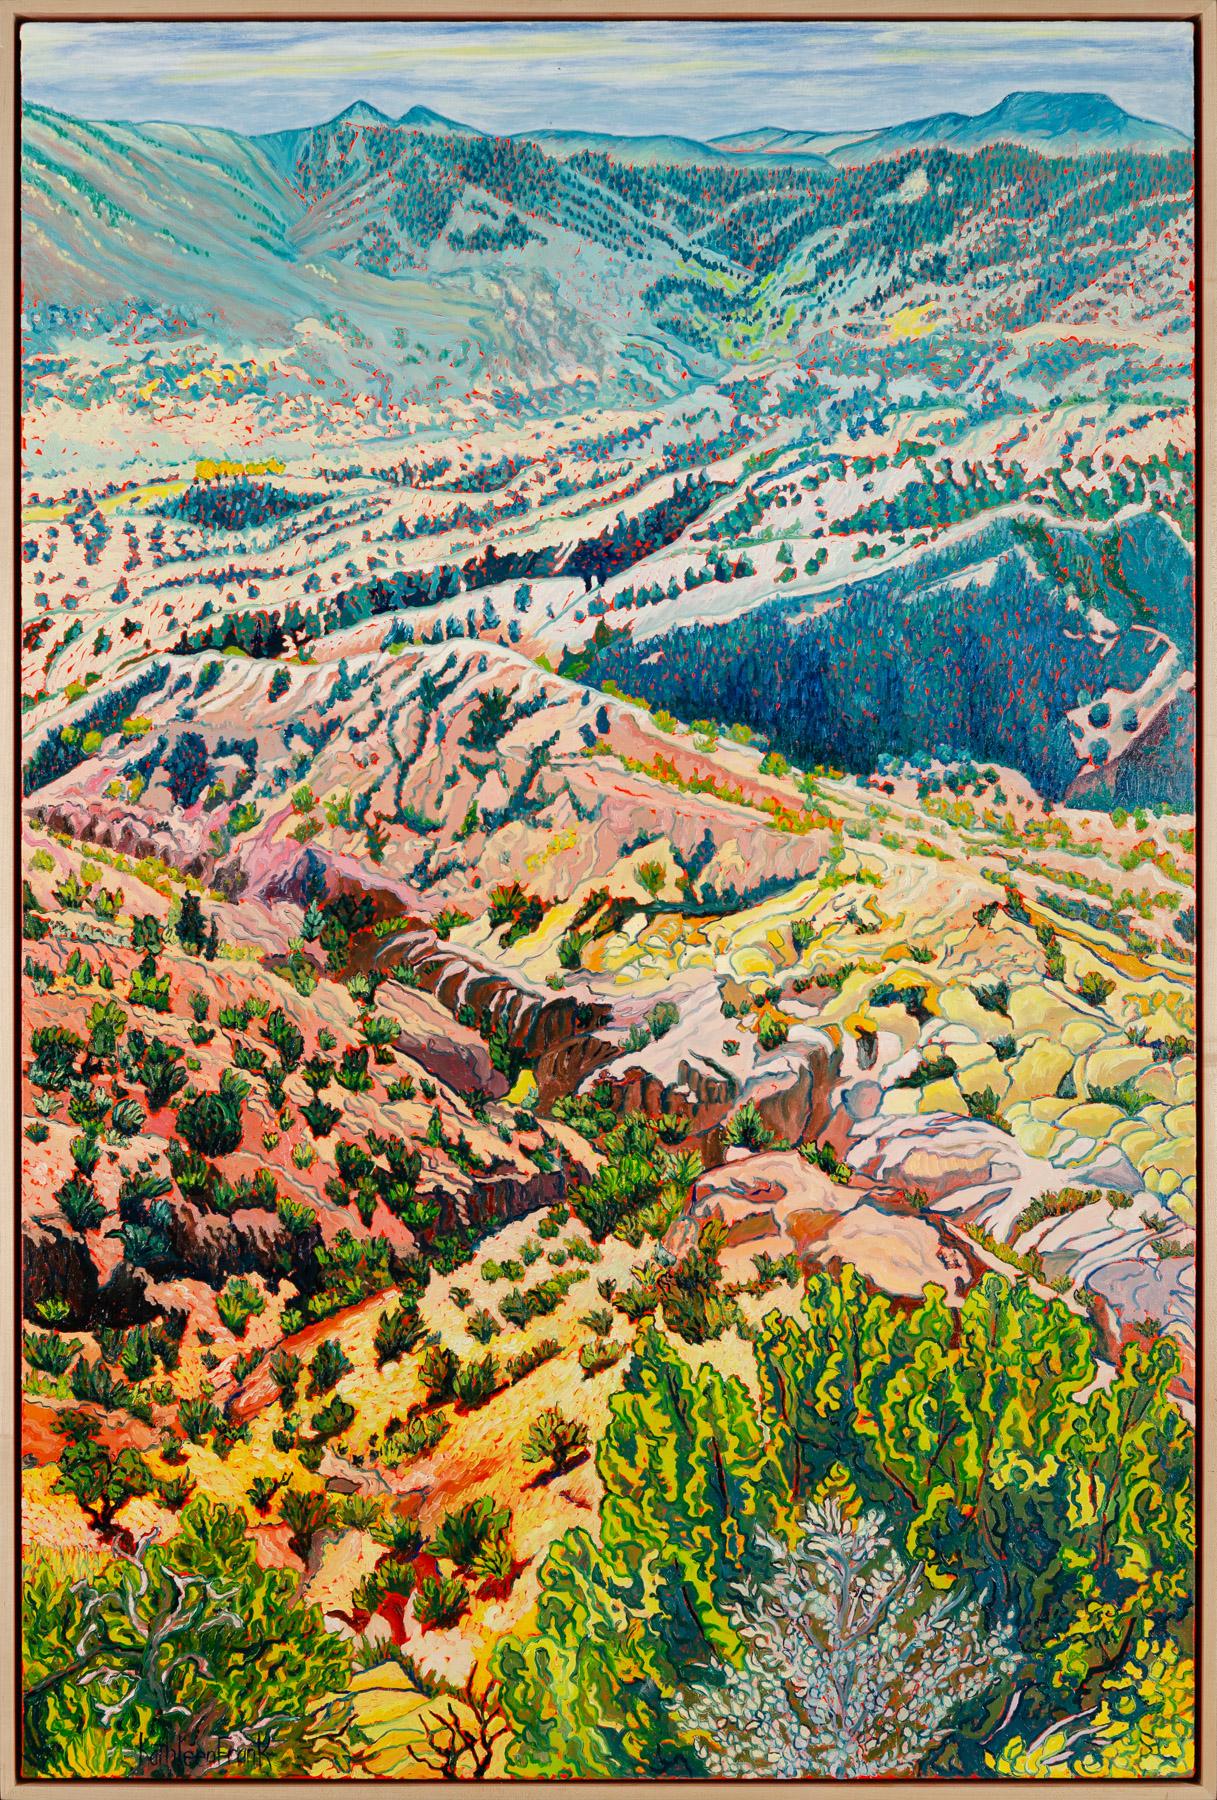 Copper Canyon - Painting by Kathleen Frank